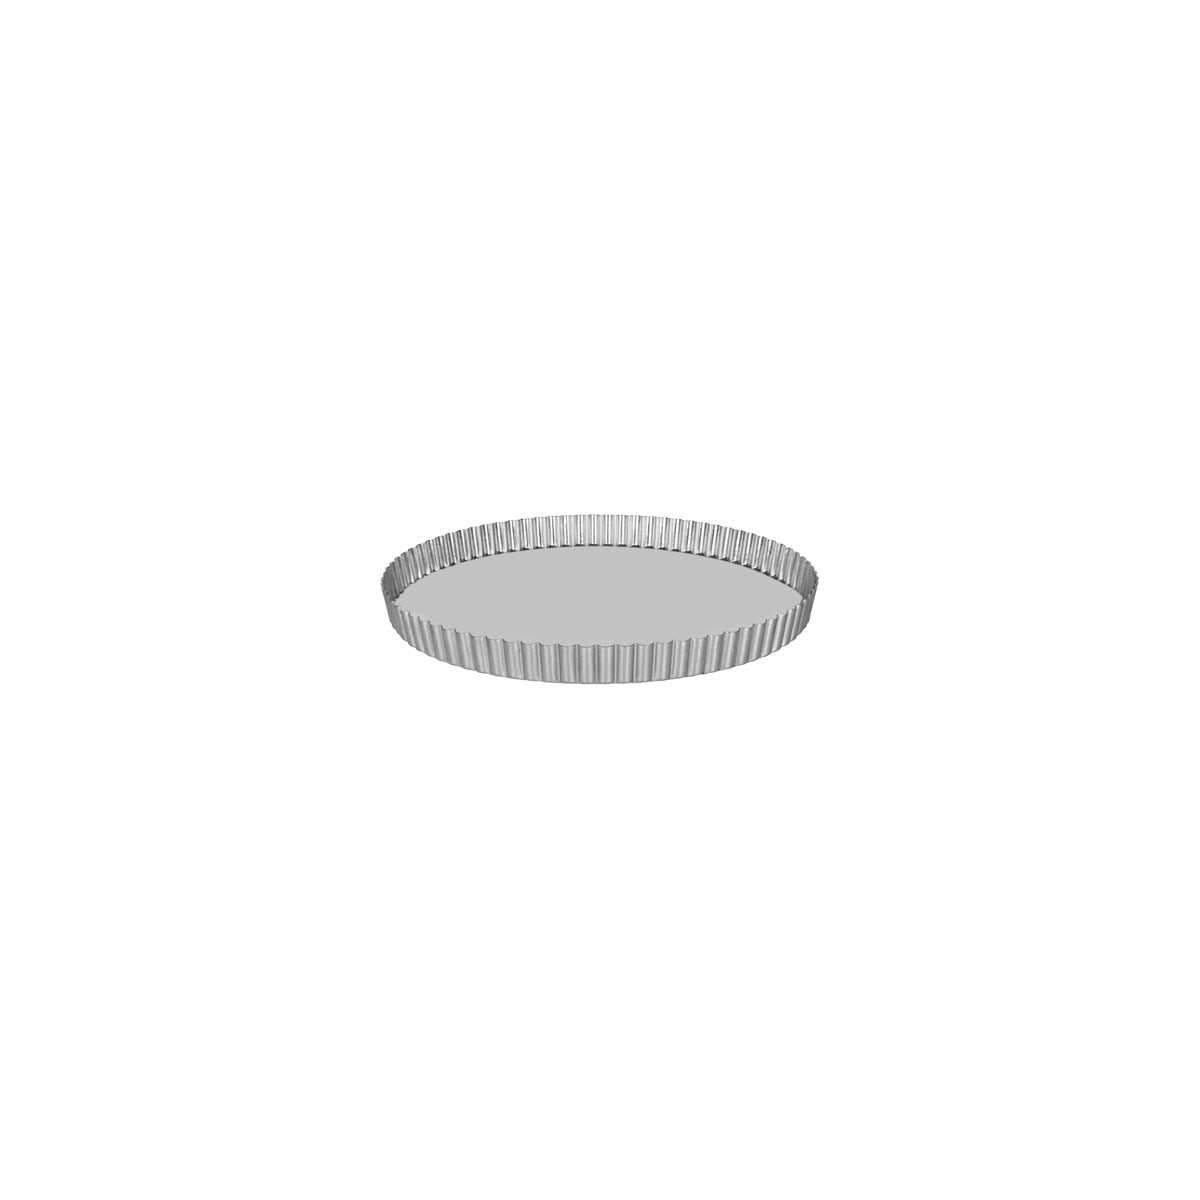 64124 Guery Quiche Pan Round Fluted Loose Base 240x25mm Tomkin Australia Hospitality Supplies